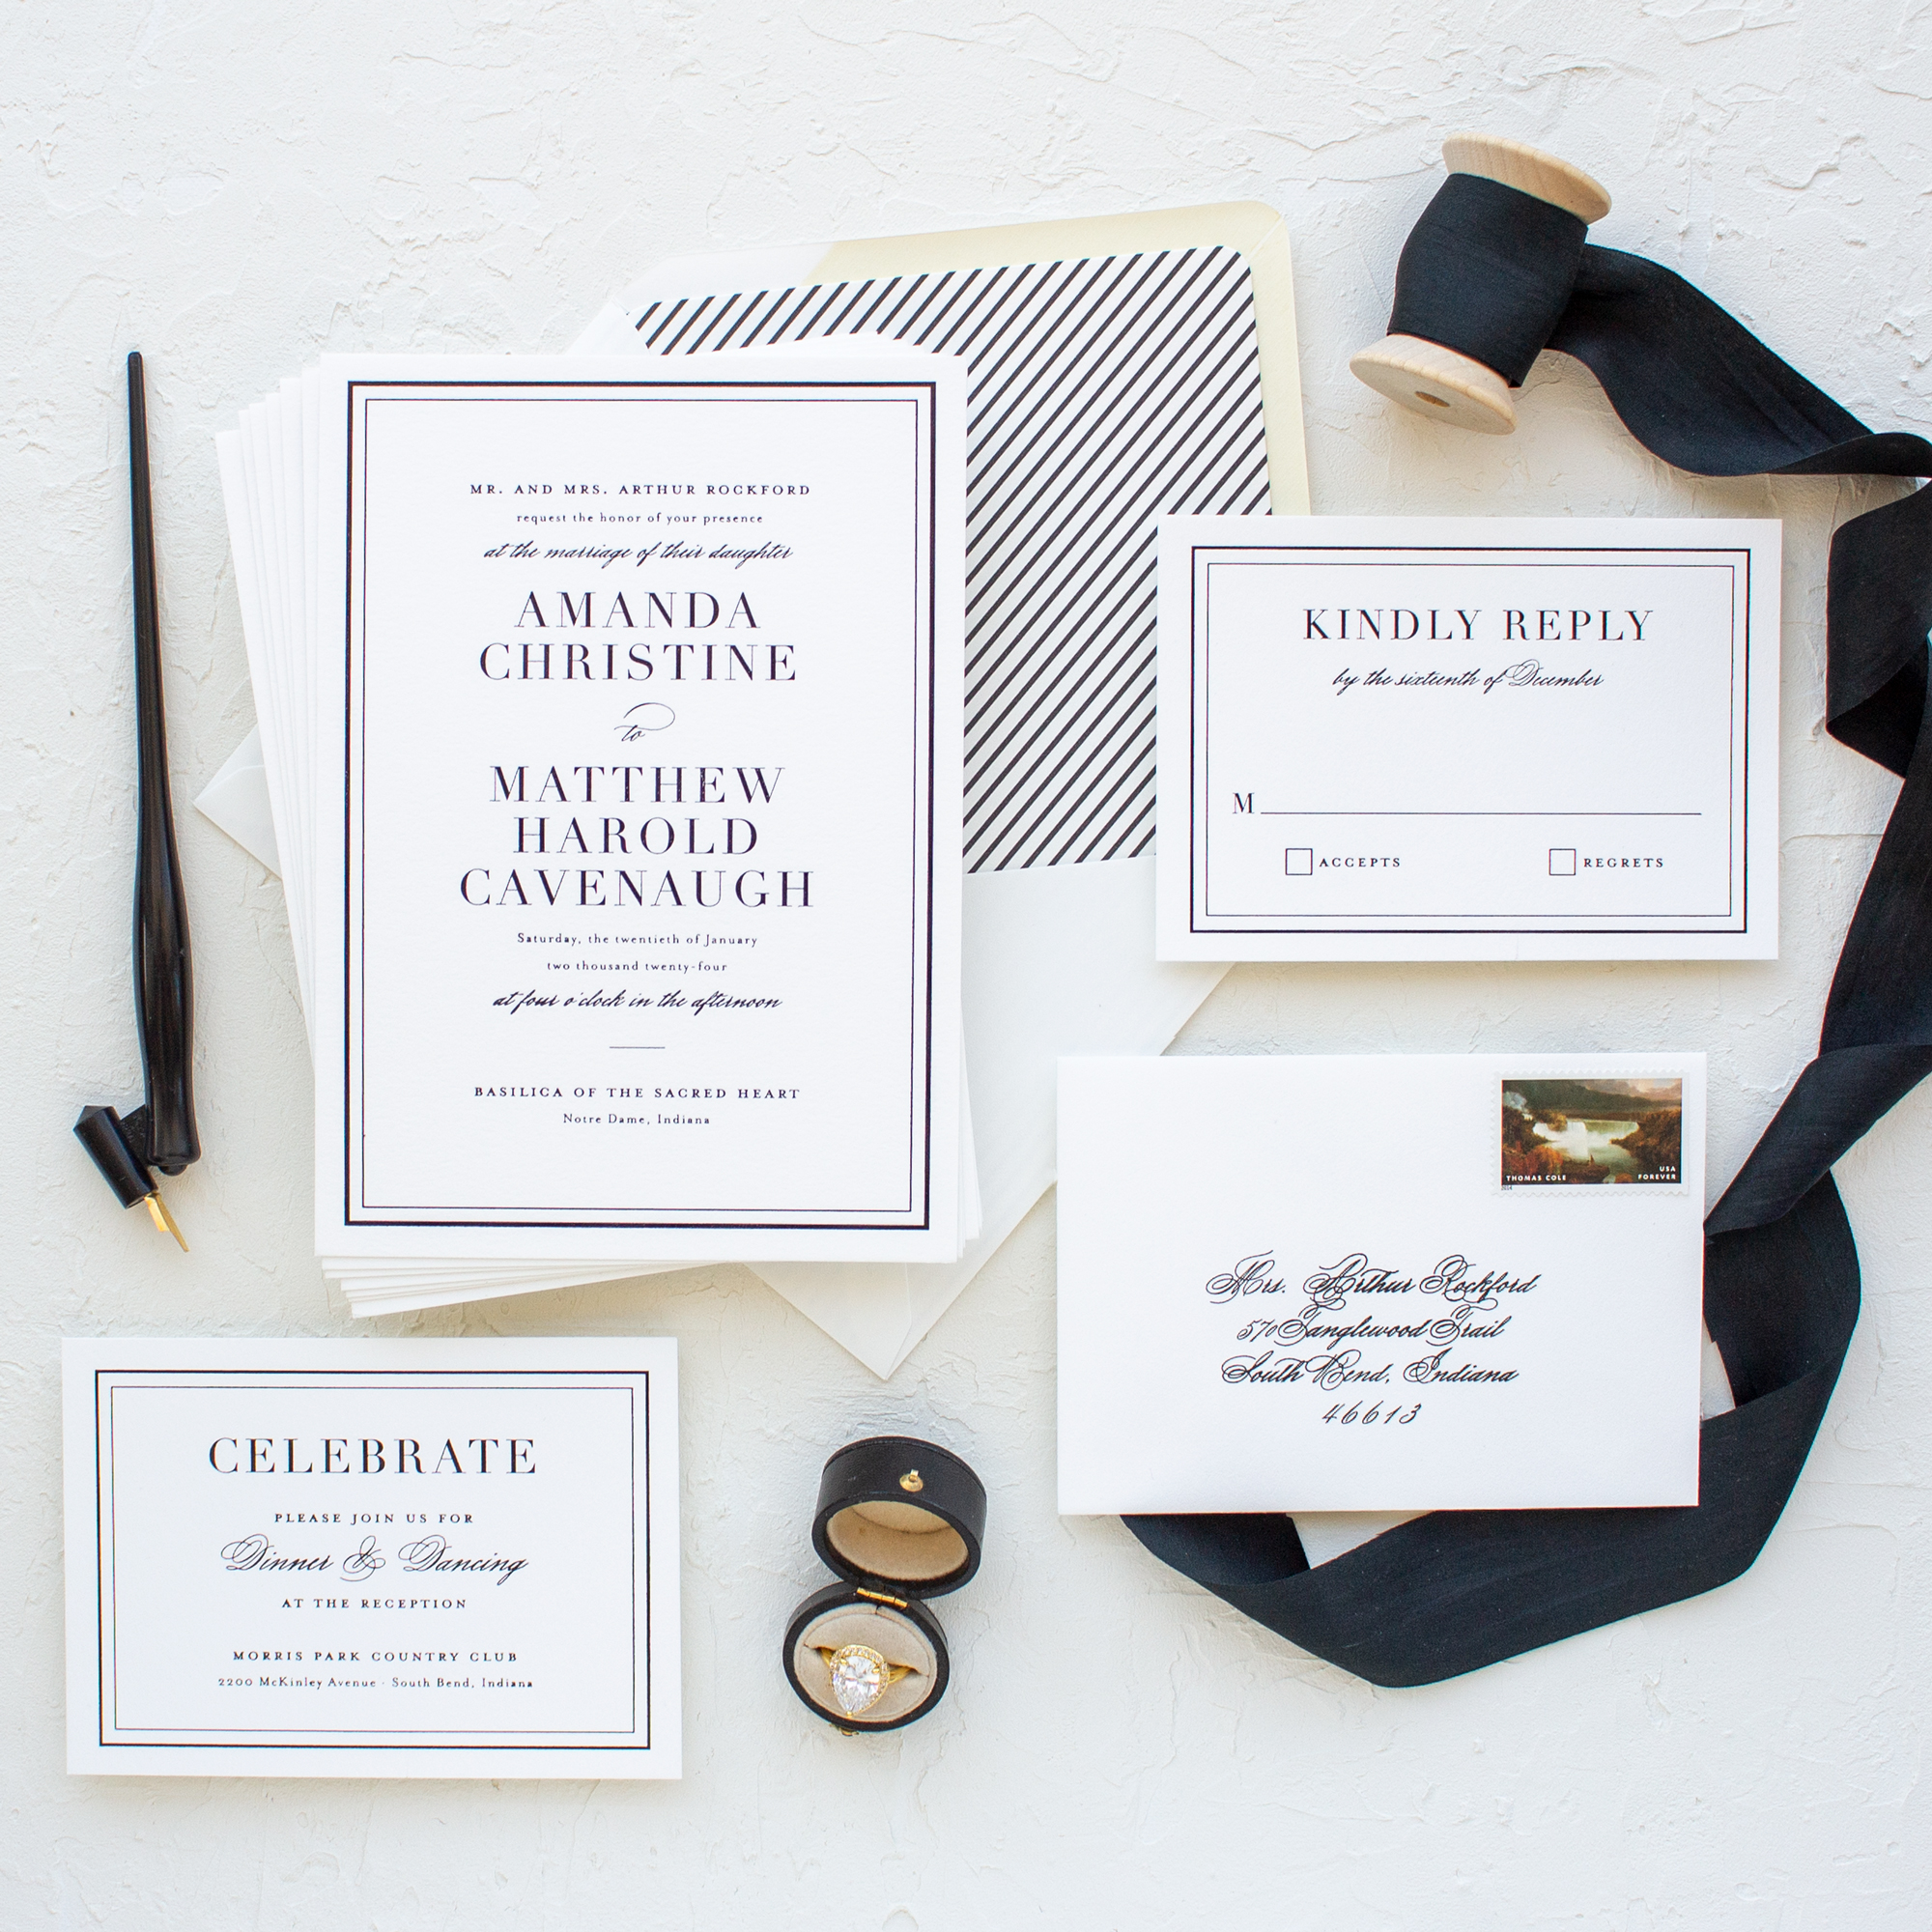 Silk Ribbon Wedding Invitations  The Wedding Stationery Guide - Banter and  Charm